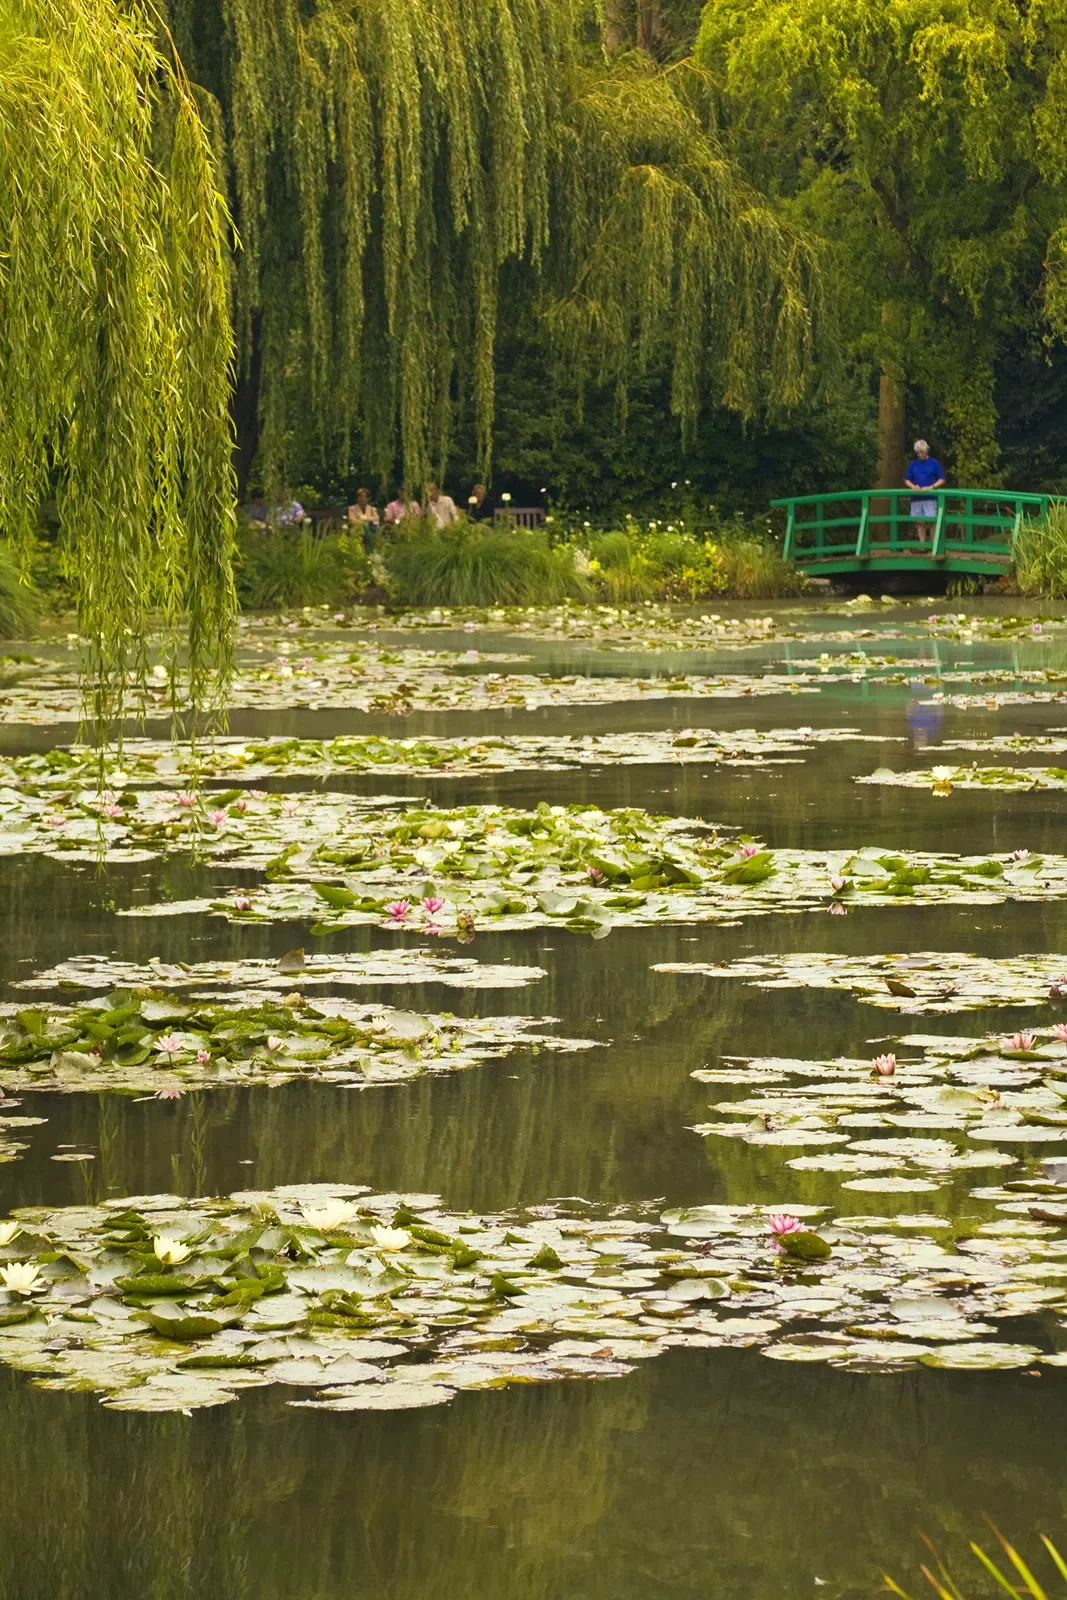 The Water Lily Bridge